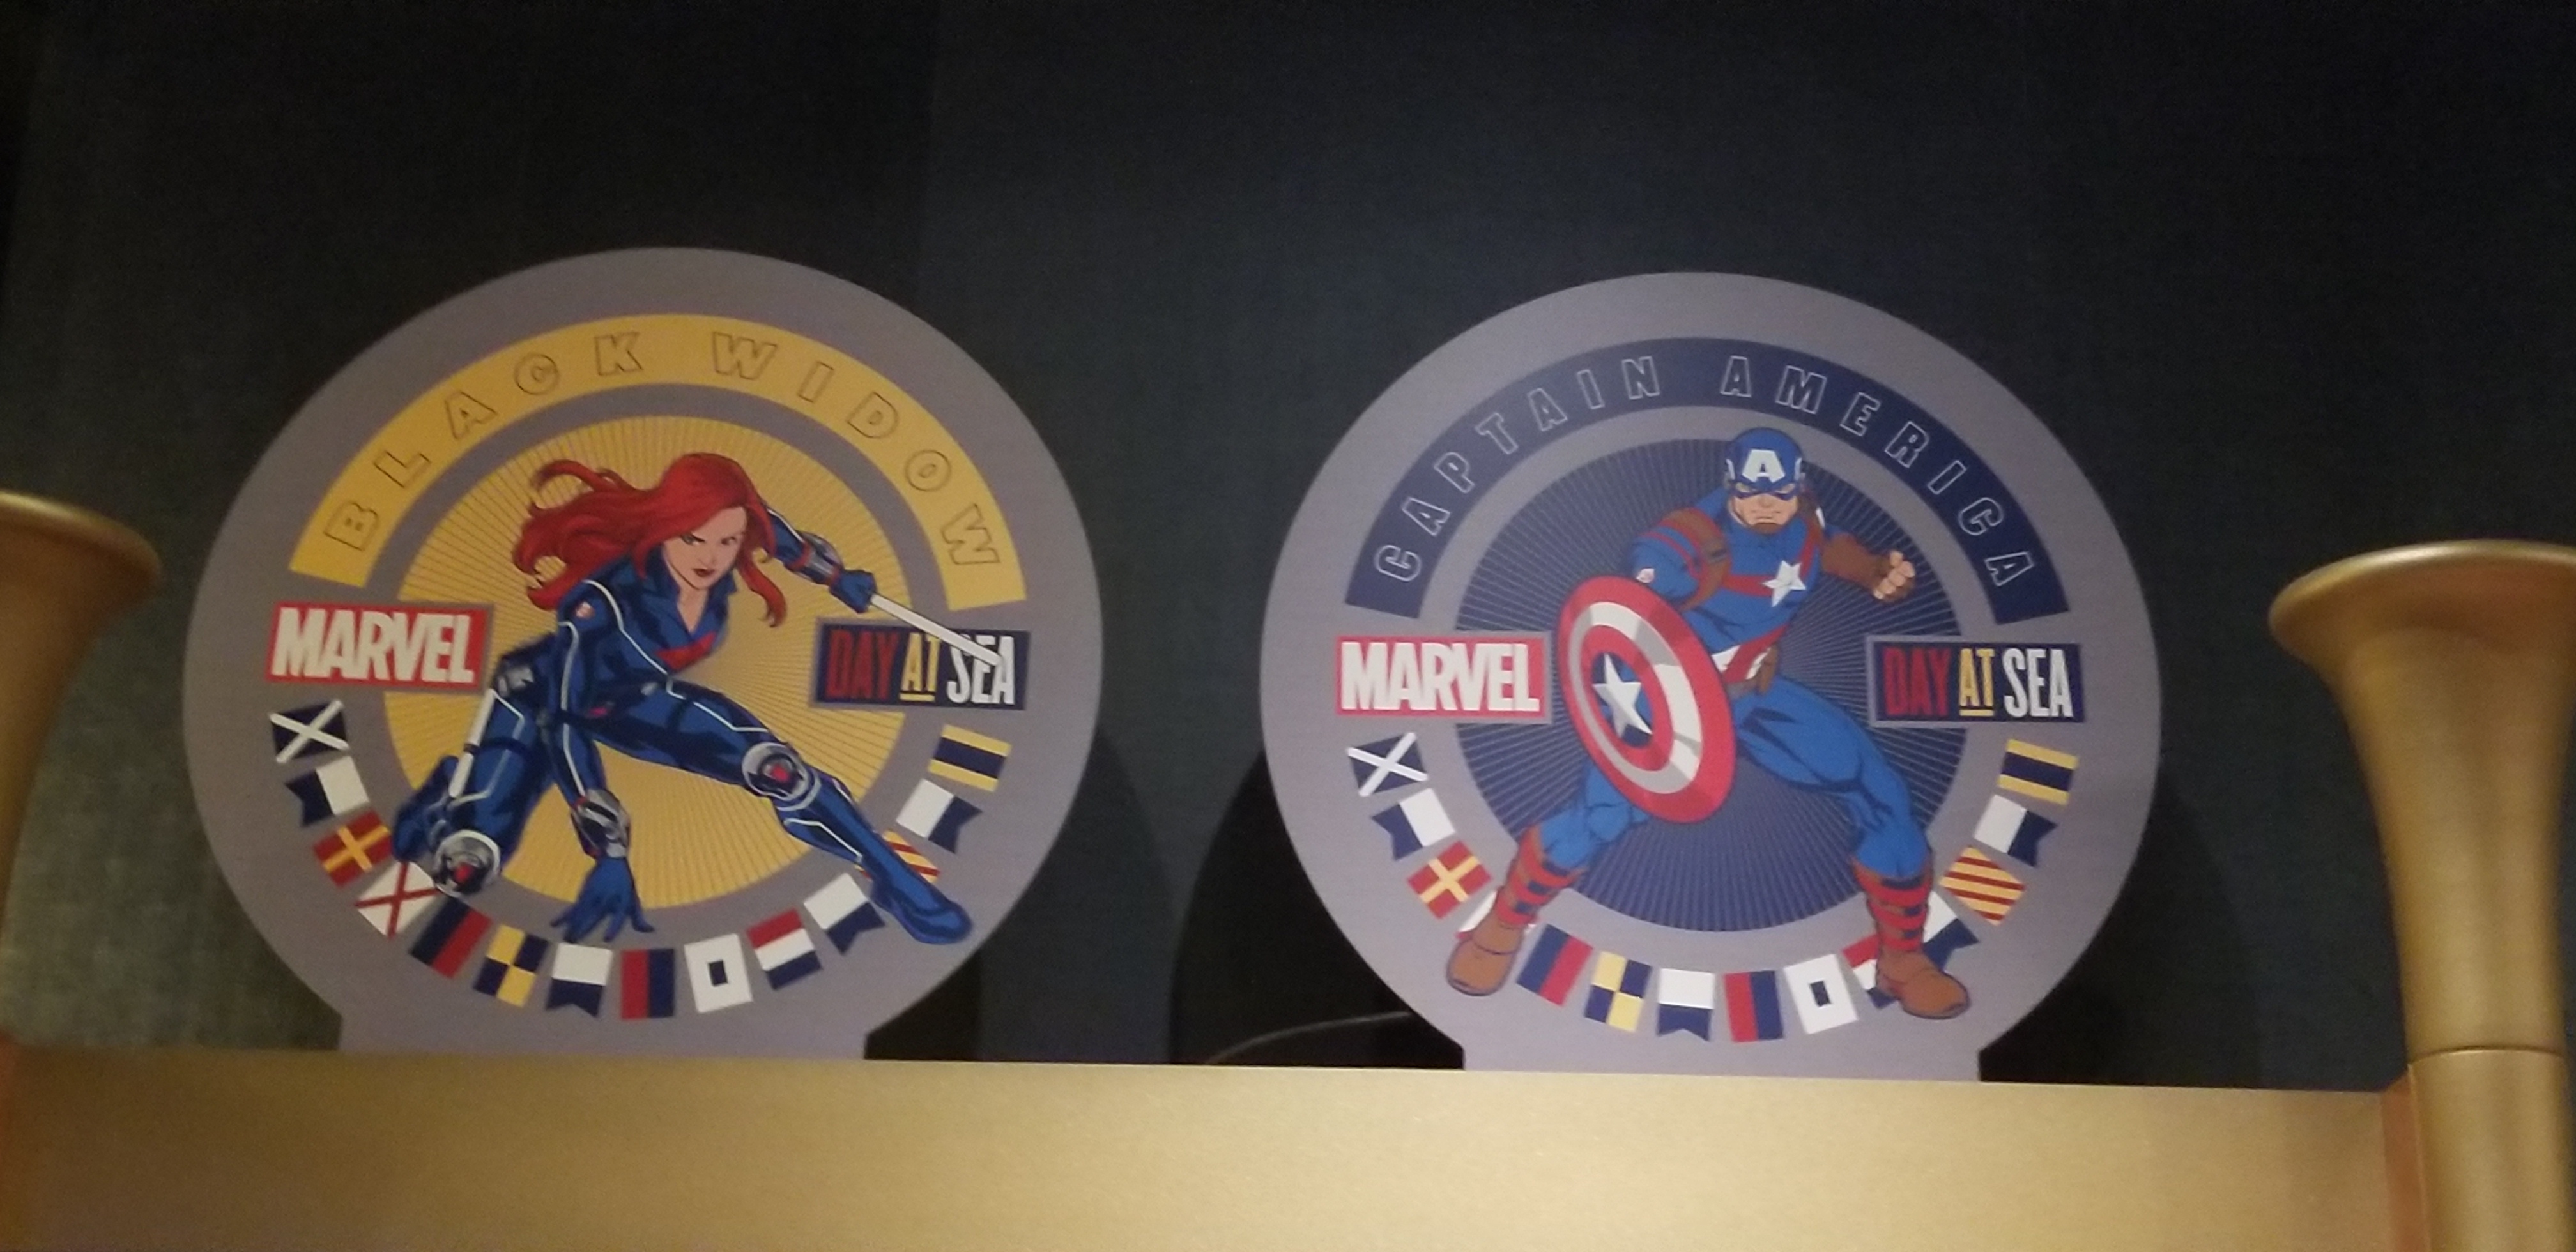 Having a Marvel-ous Day at Sea on Disney Cruise Line